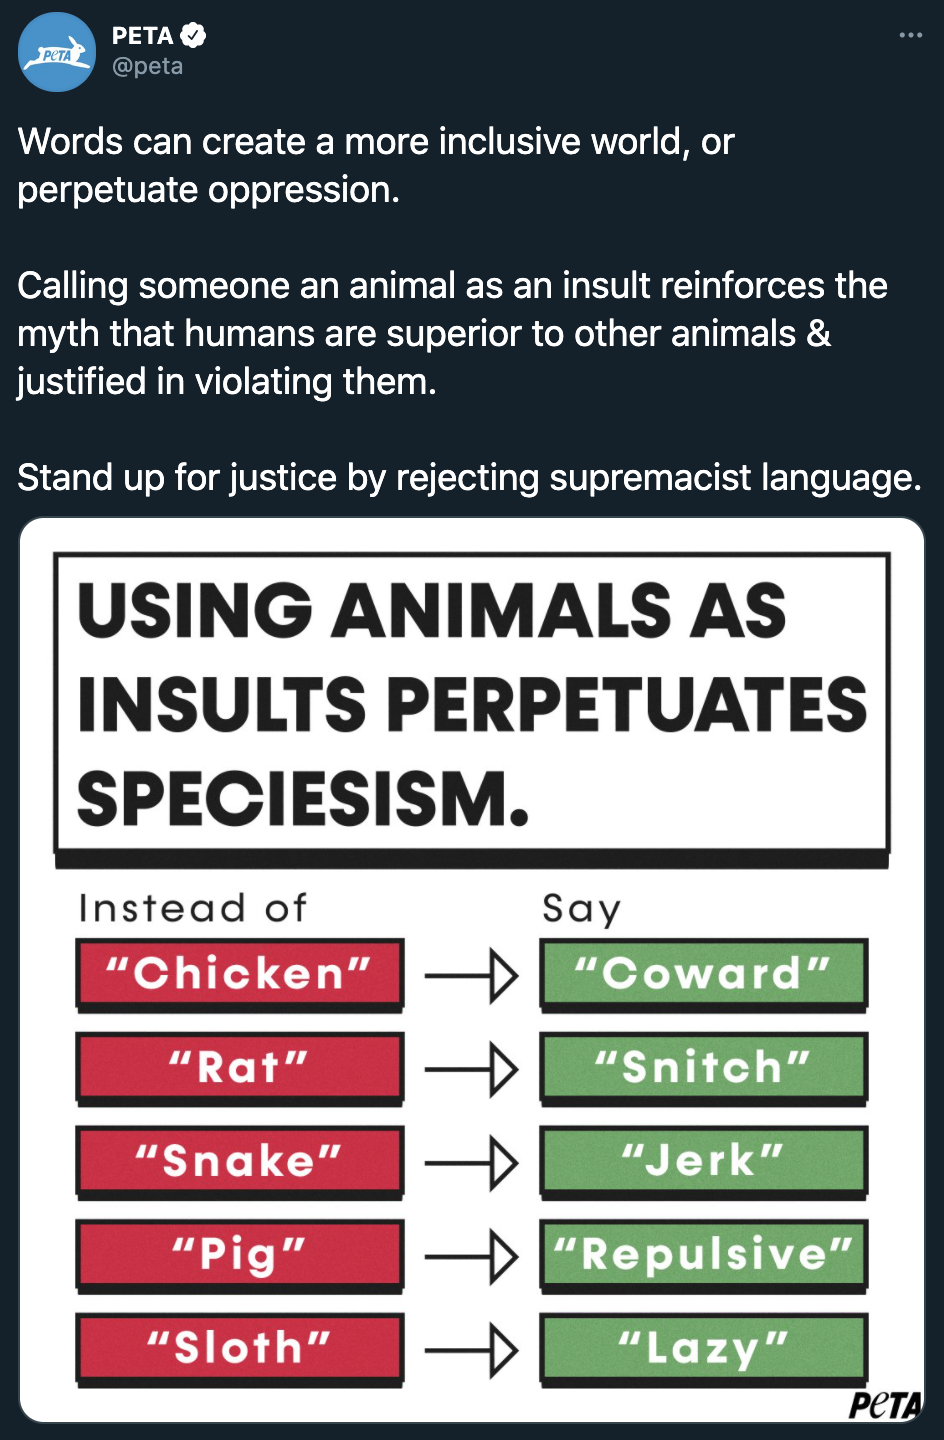 peta roast jokes -- Peta Words can create a more inclusive world, or perpetuate oppression. Calling someone an animal as an insult reinforces the myth that humans are superior to other animals & justified in violating them. Stand up for justice by rejecti